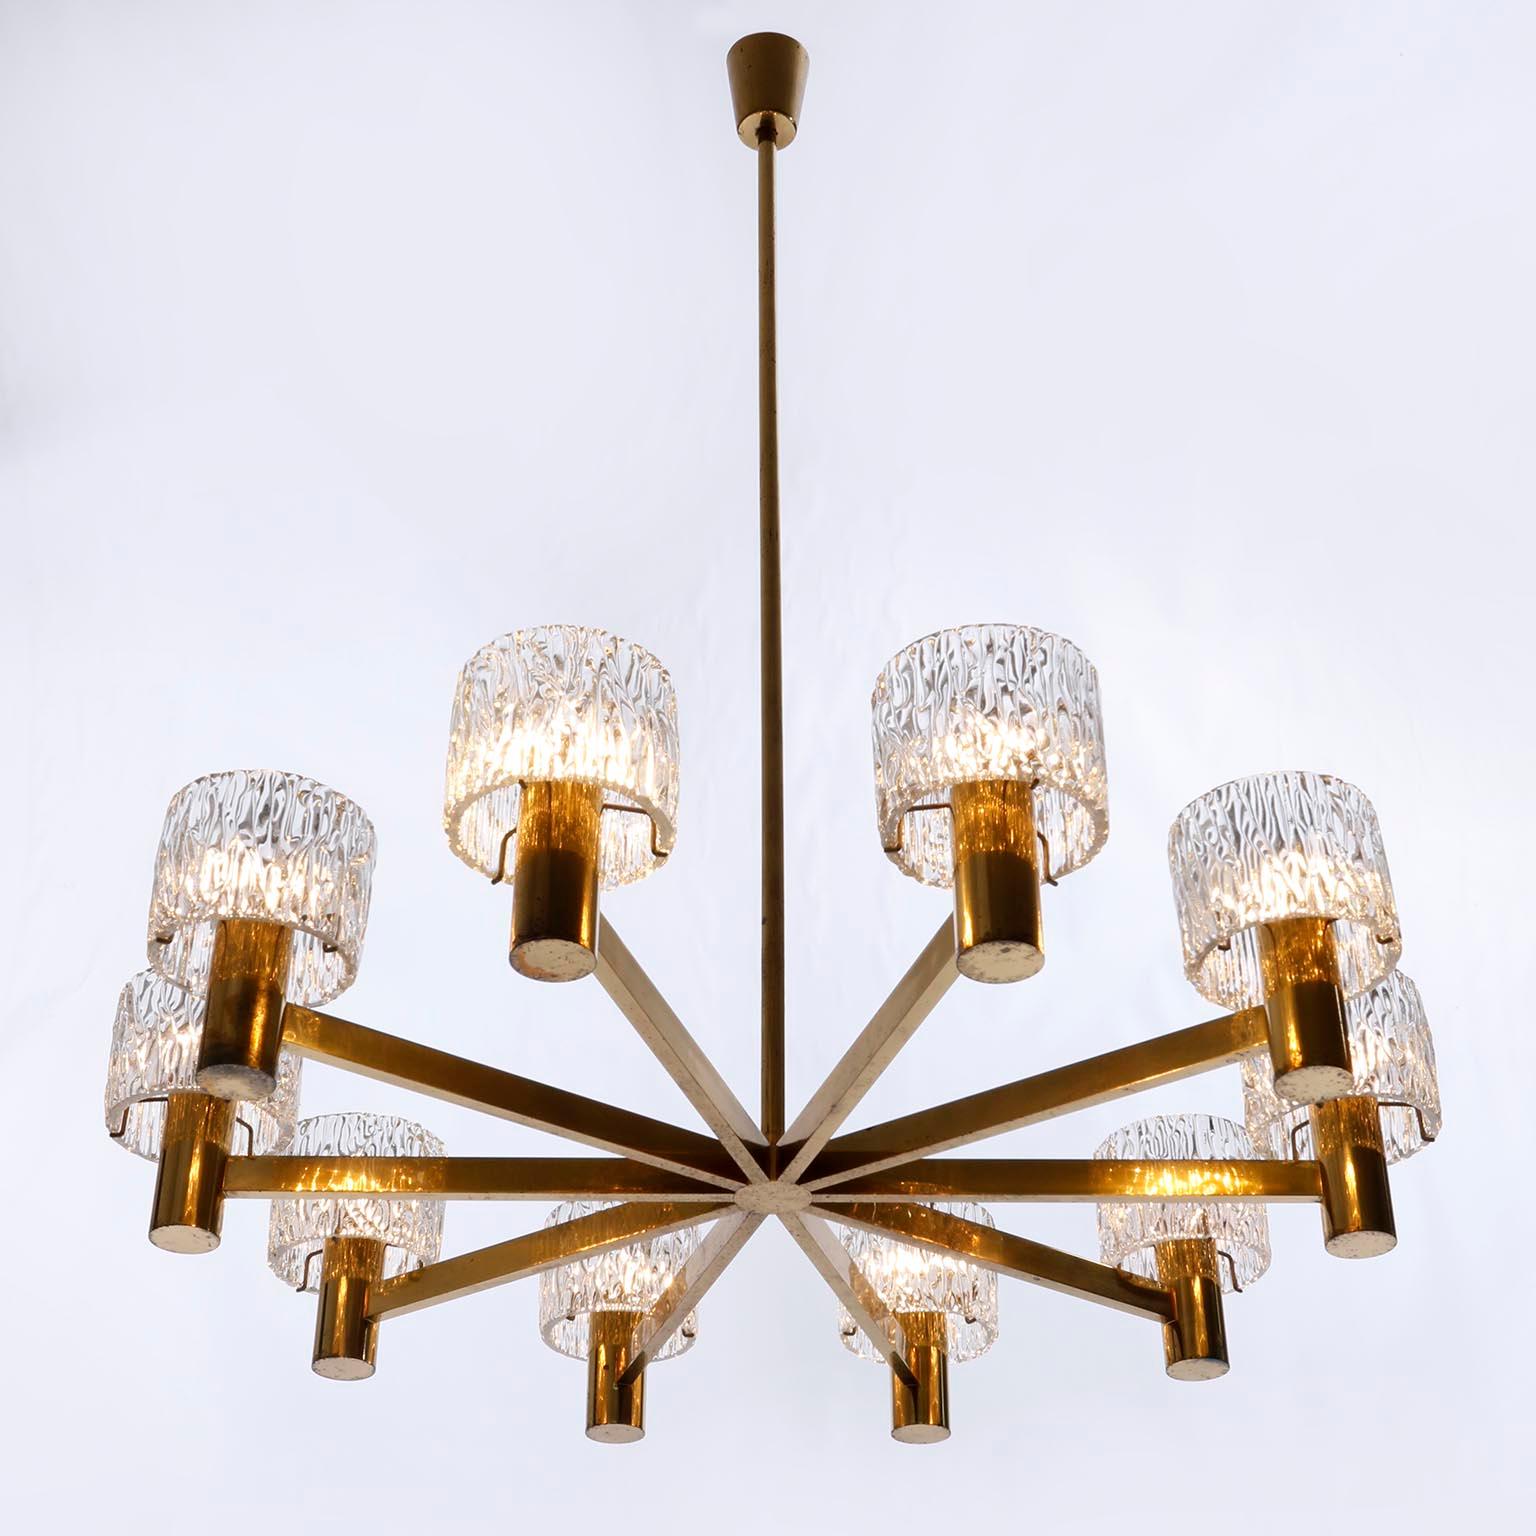 Mid-20th Century Large 10-Arm Chandelier by J.T. Kalmar, Brass and Textured Pressed Glass, 1960s For Sale